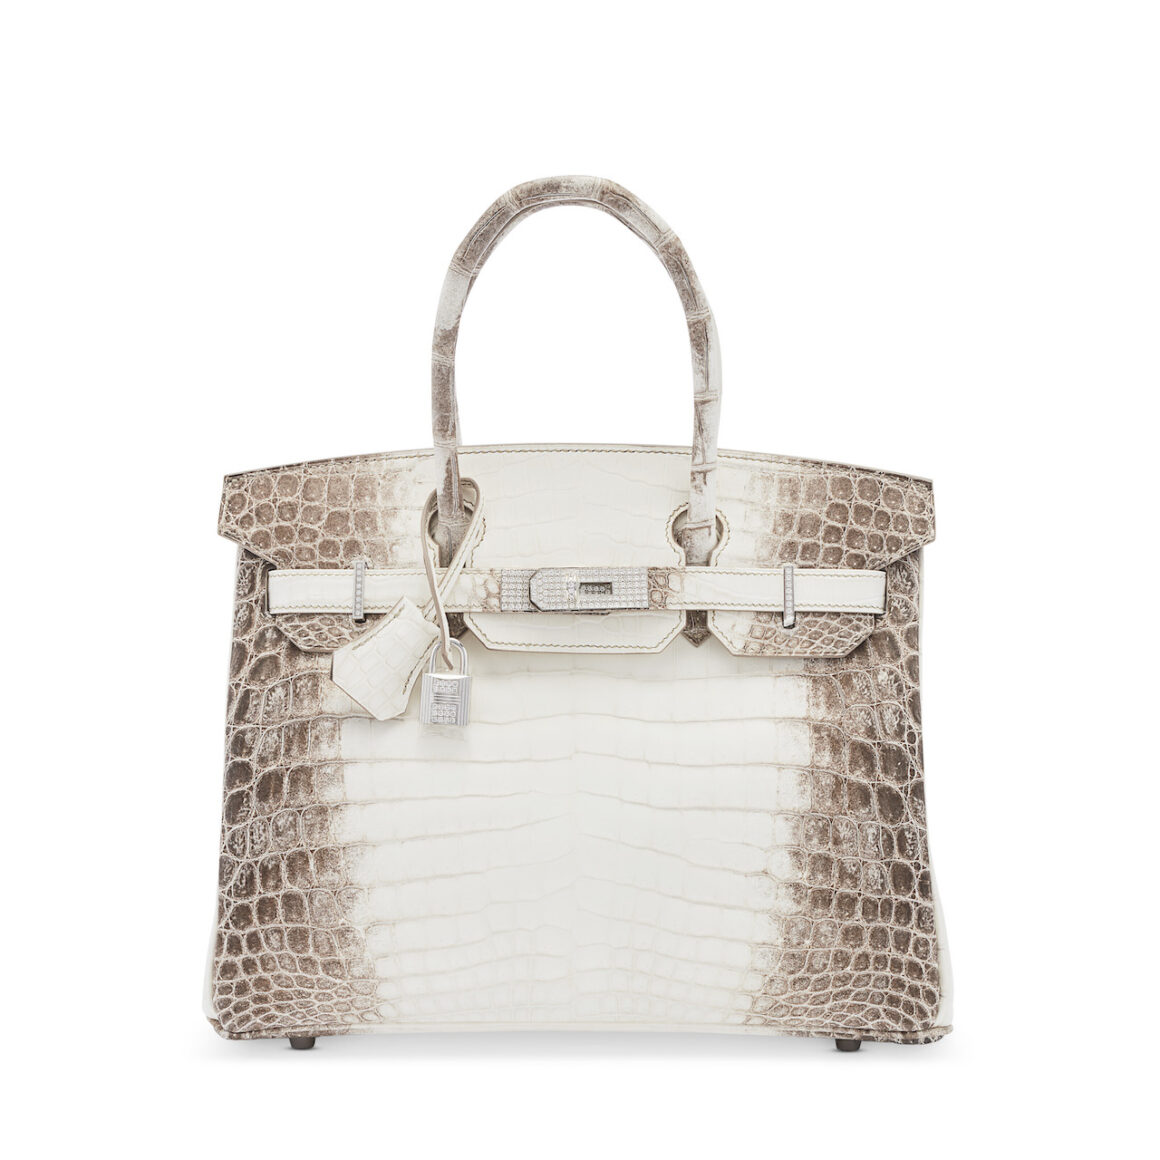 Top 5 Rare Bags by Chic Icon - The Chic Icon